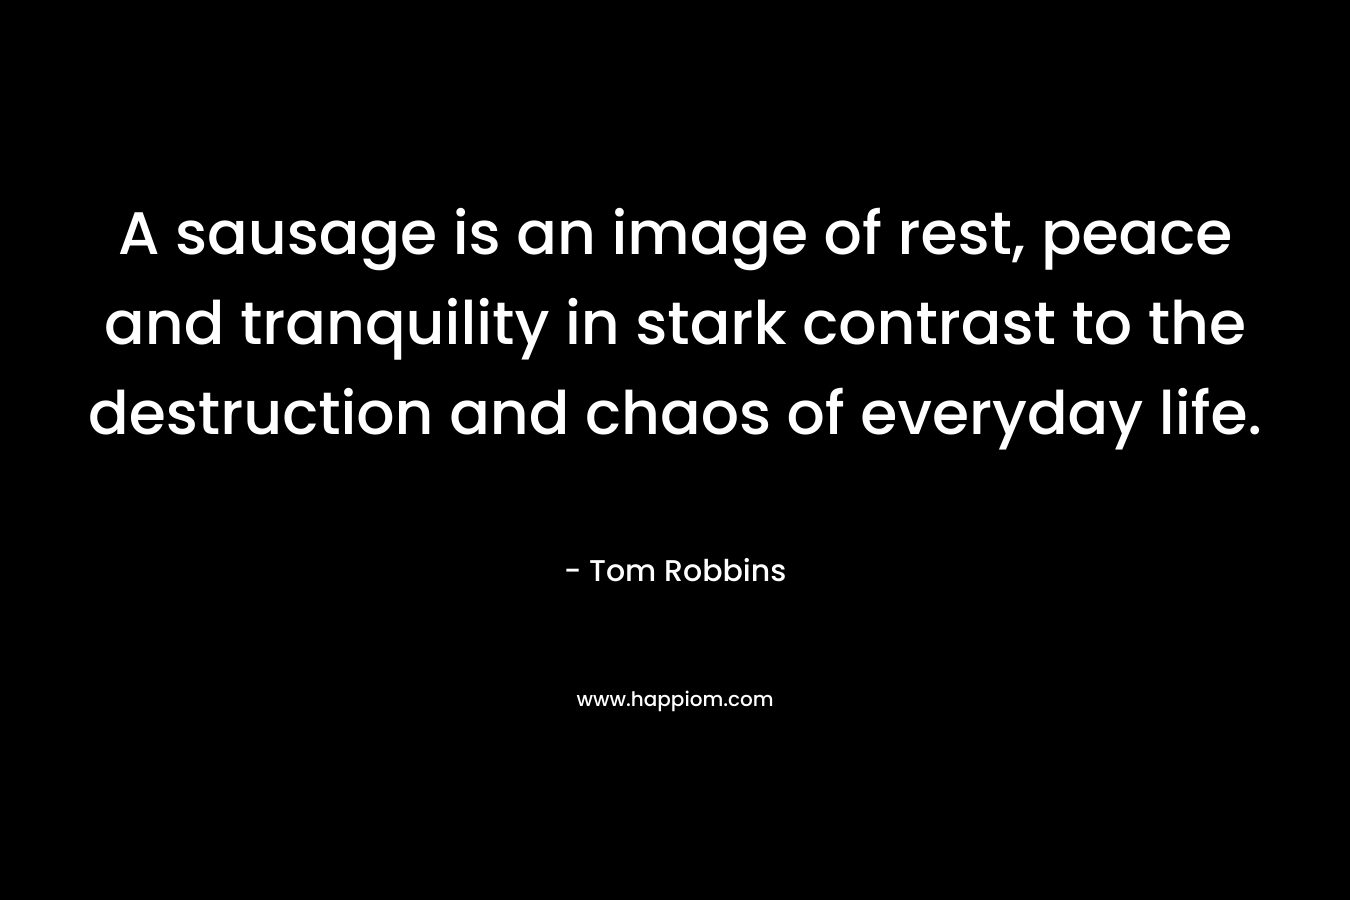 A sausage is an image of rest, peace and tranquility in stark contrast to the destruction and chaos of everyday life. – Tom Robbins